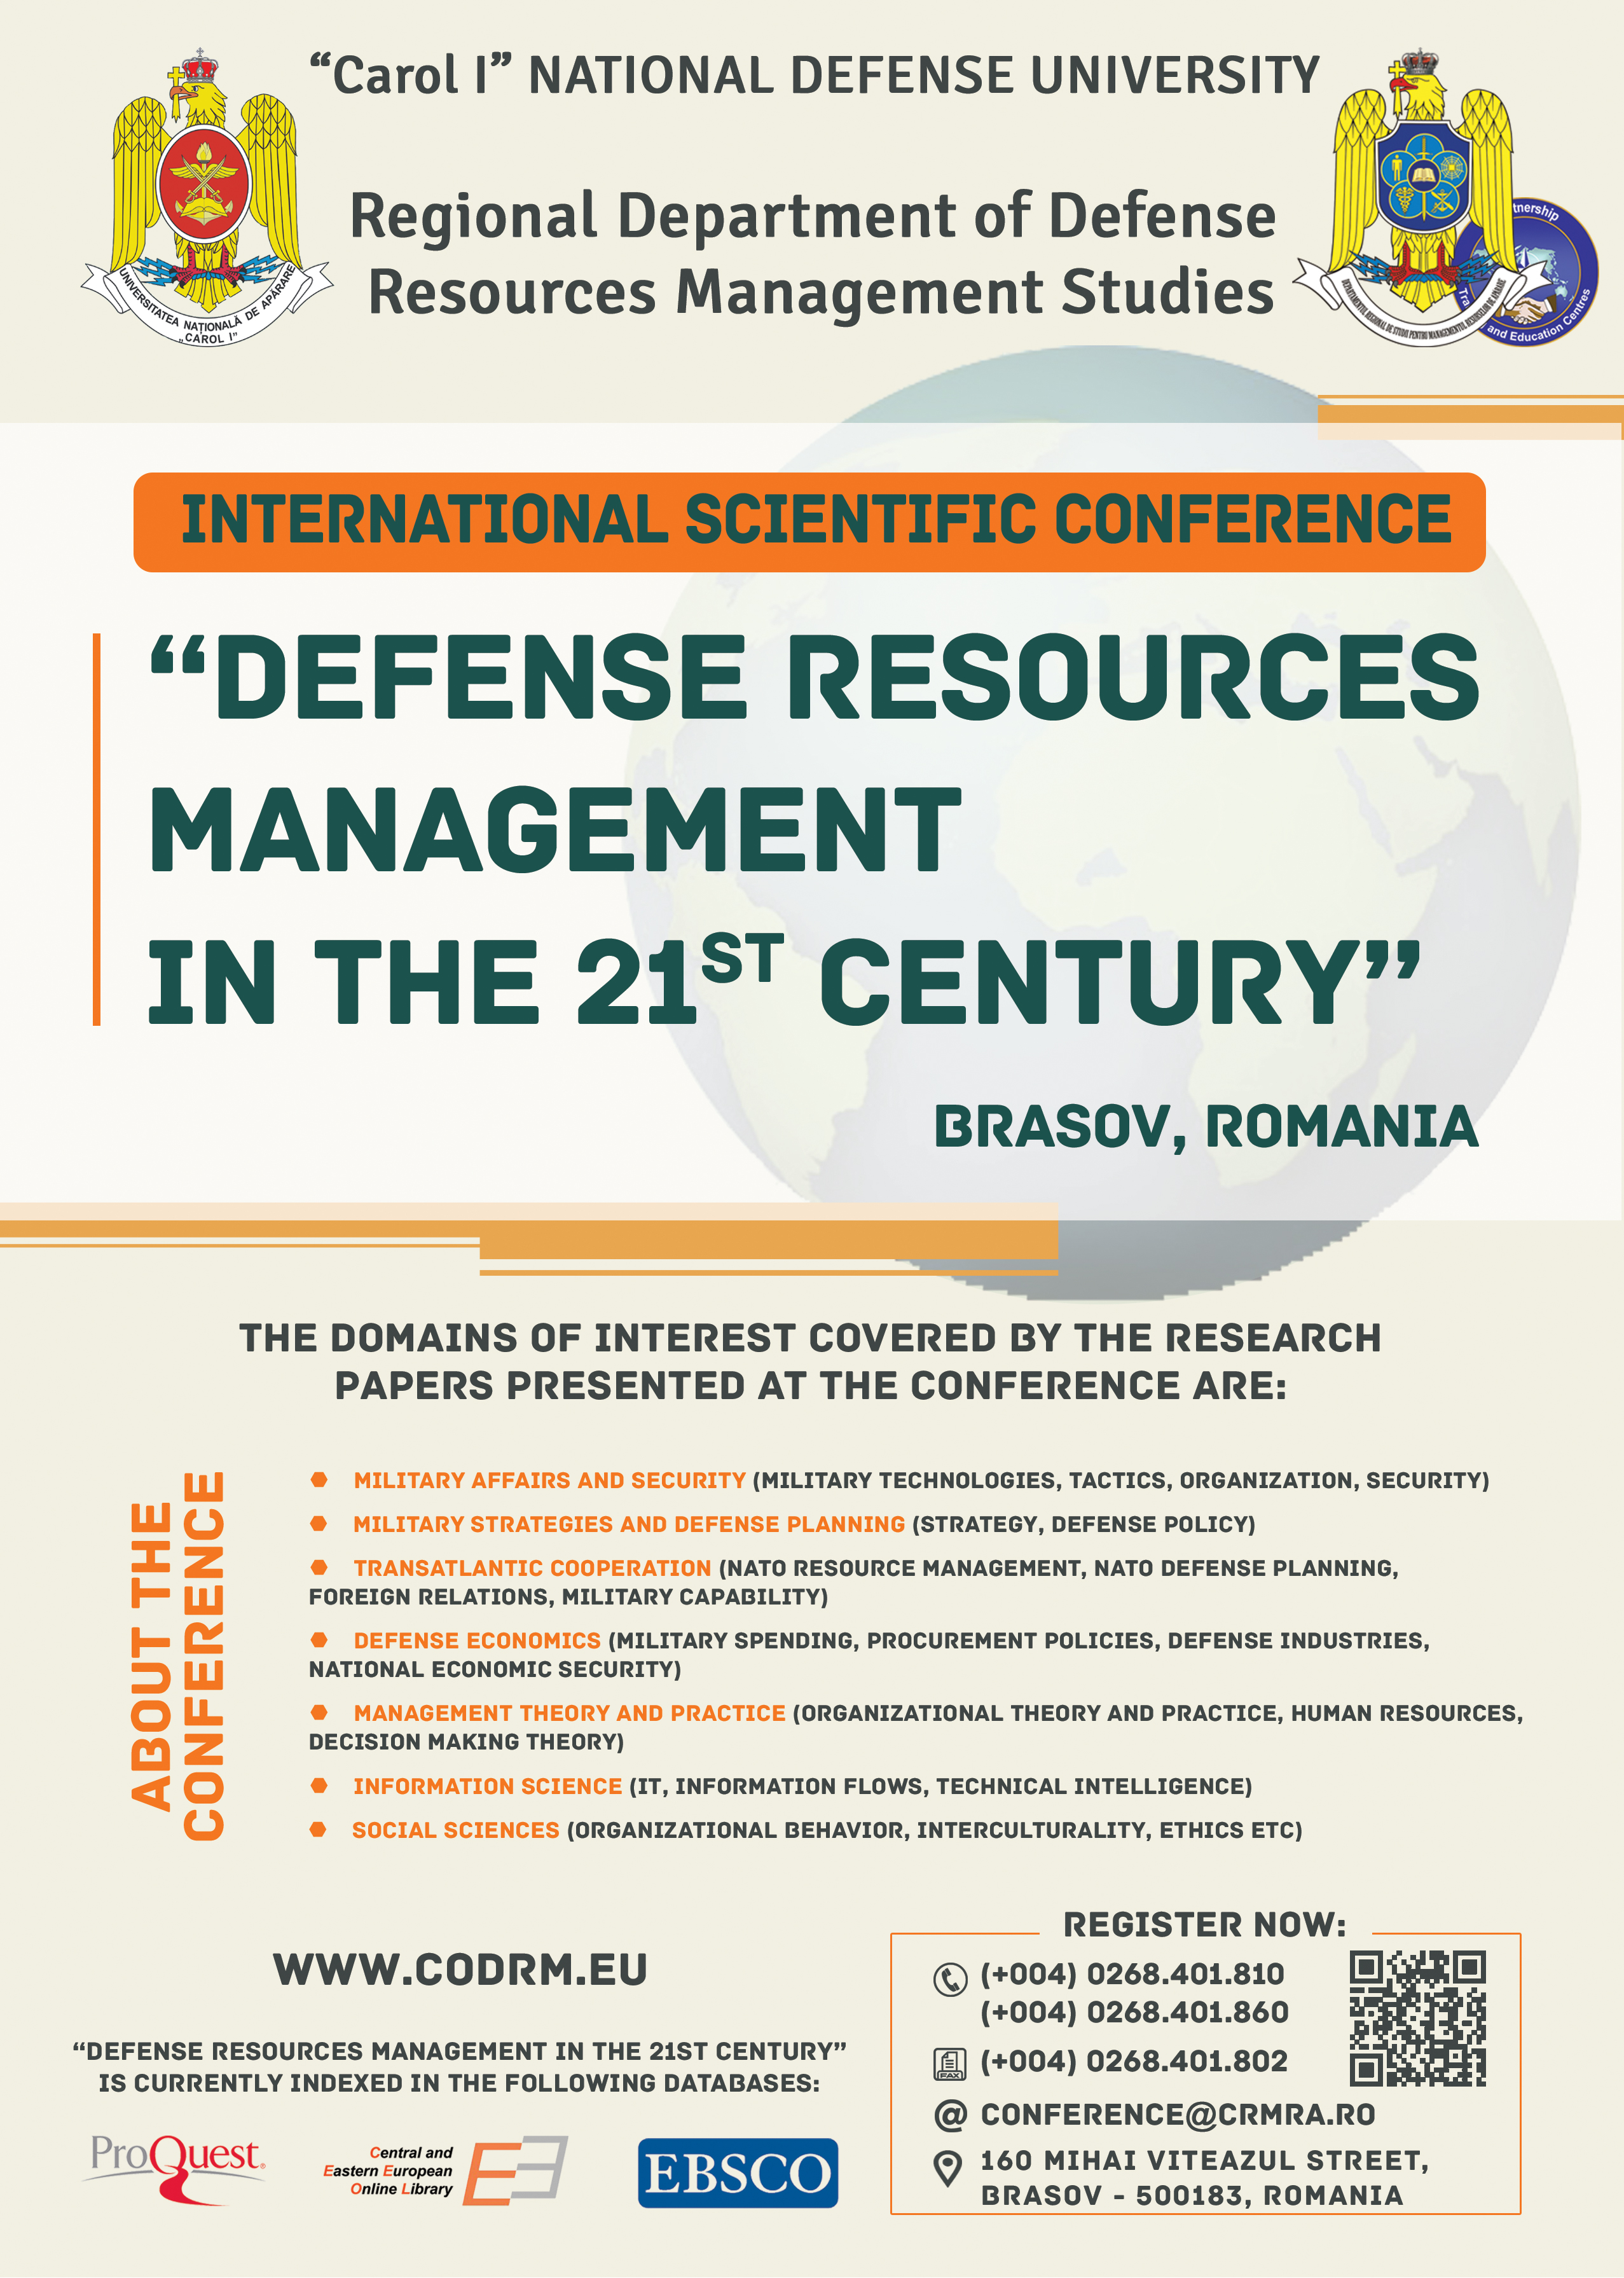 DIFFICULTIES IN ESTABLISHING SYNTHETIC
INDICATORS TO ASSESS THE IMPACT OF DEFENSE
RESOURCE INTEGRATED MANAGEMENT ON THE
INTERNATIONAL MISSIONS Cover Image